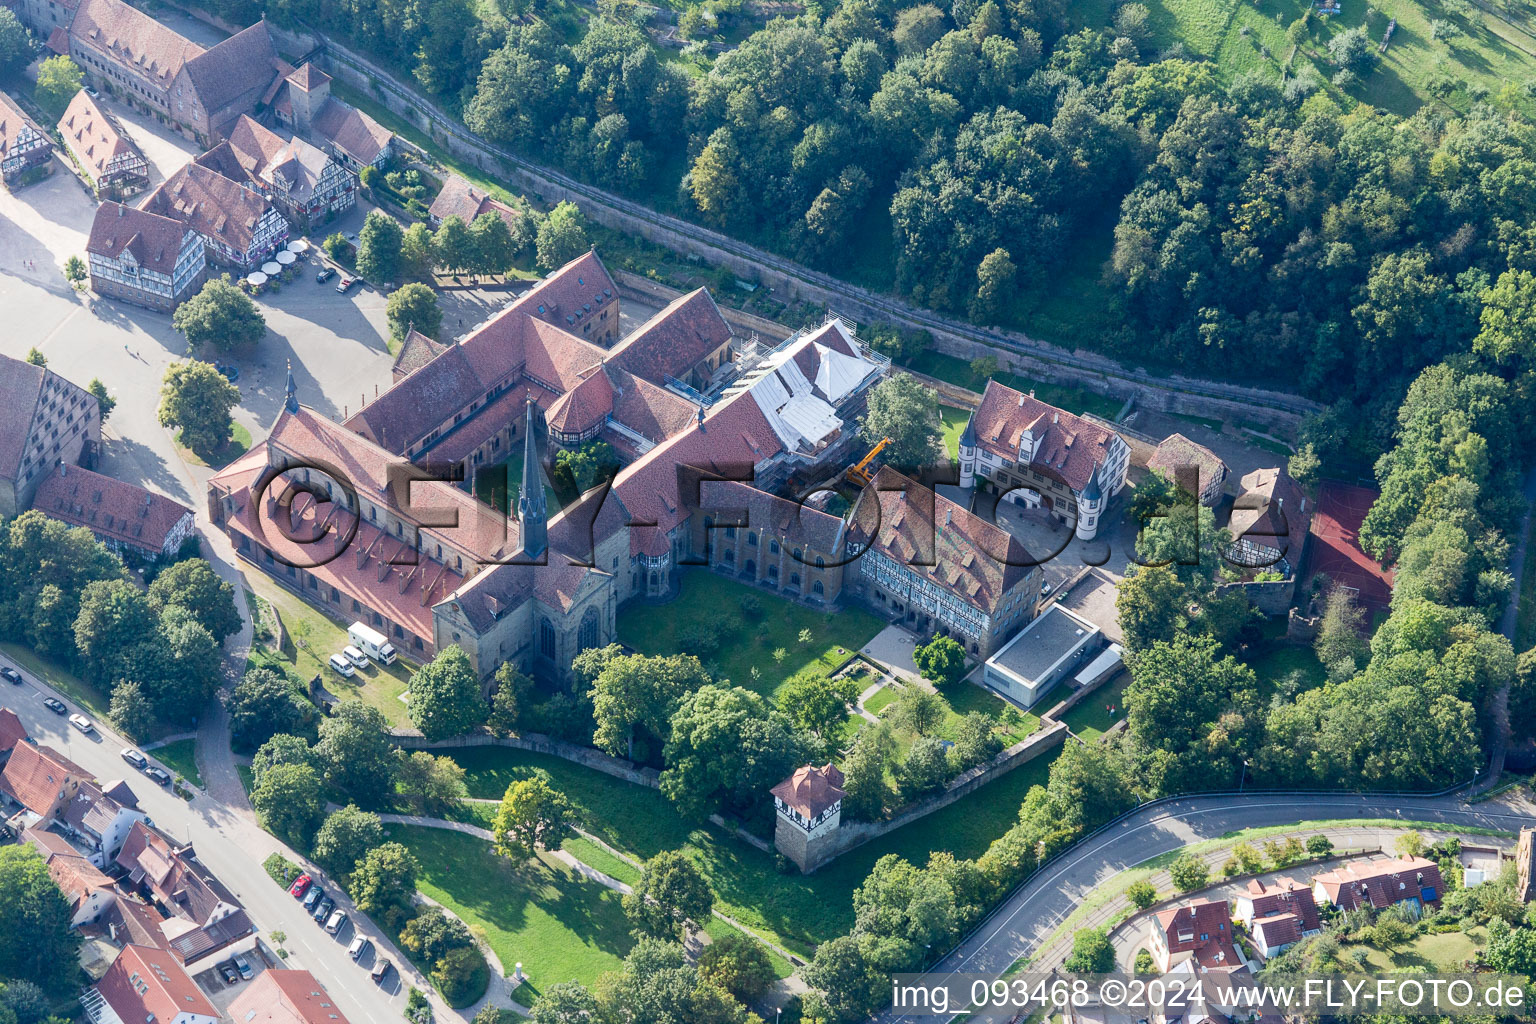 Complex of buildings of the monastery Maulbronn in Maulbronn in the state Baden-Wurttemberg